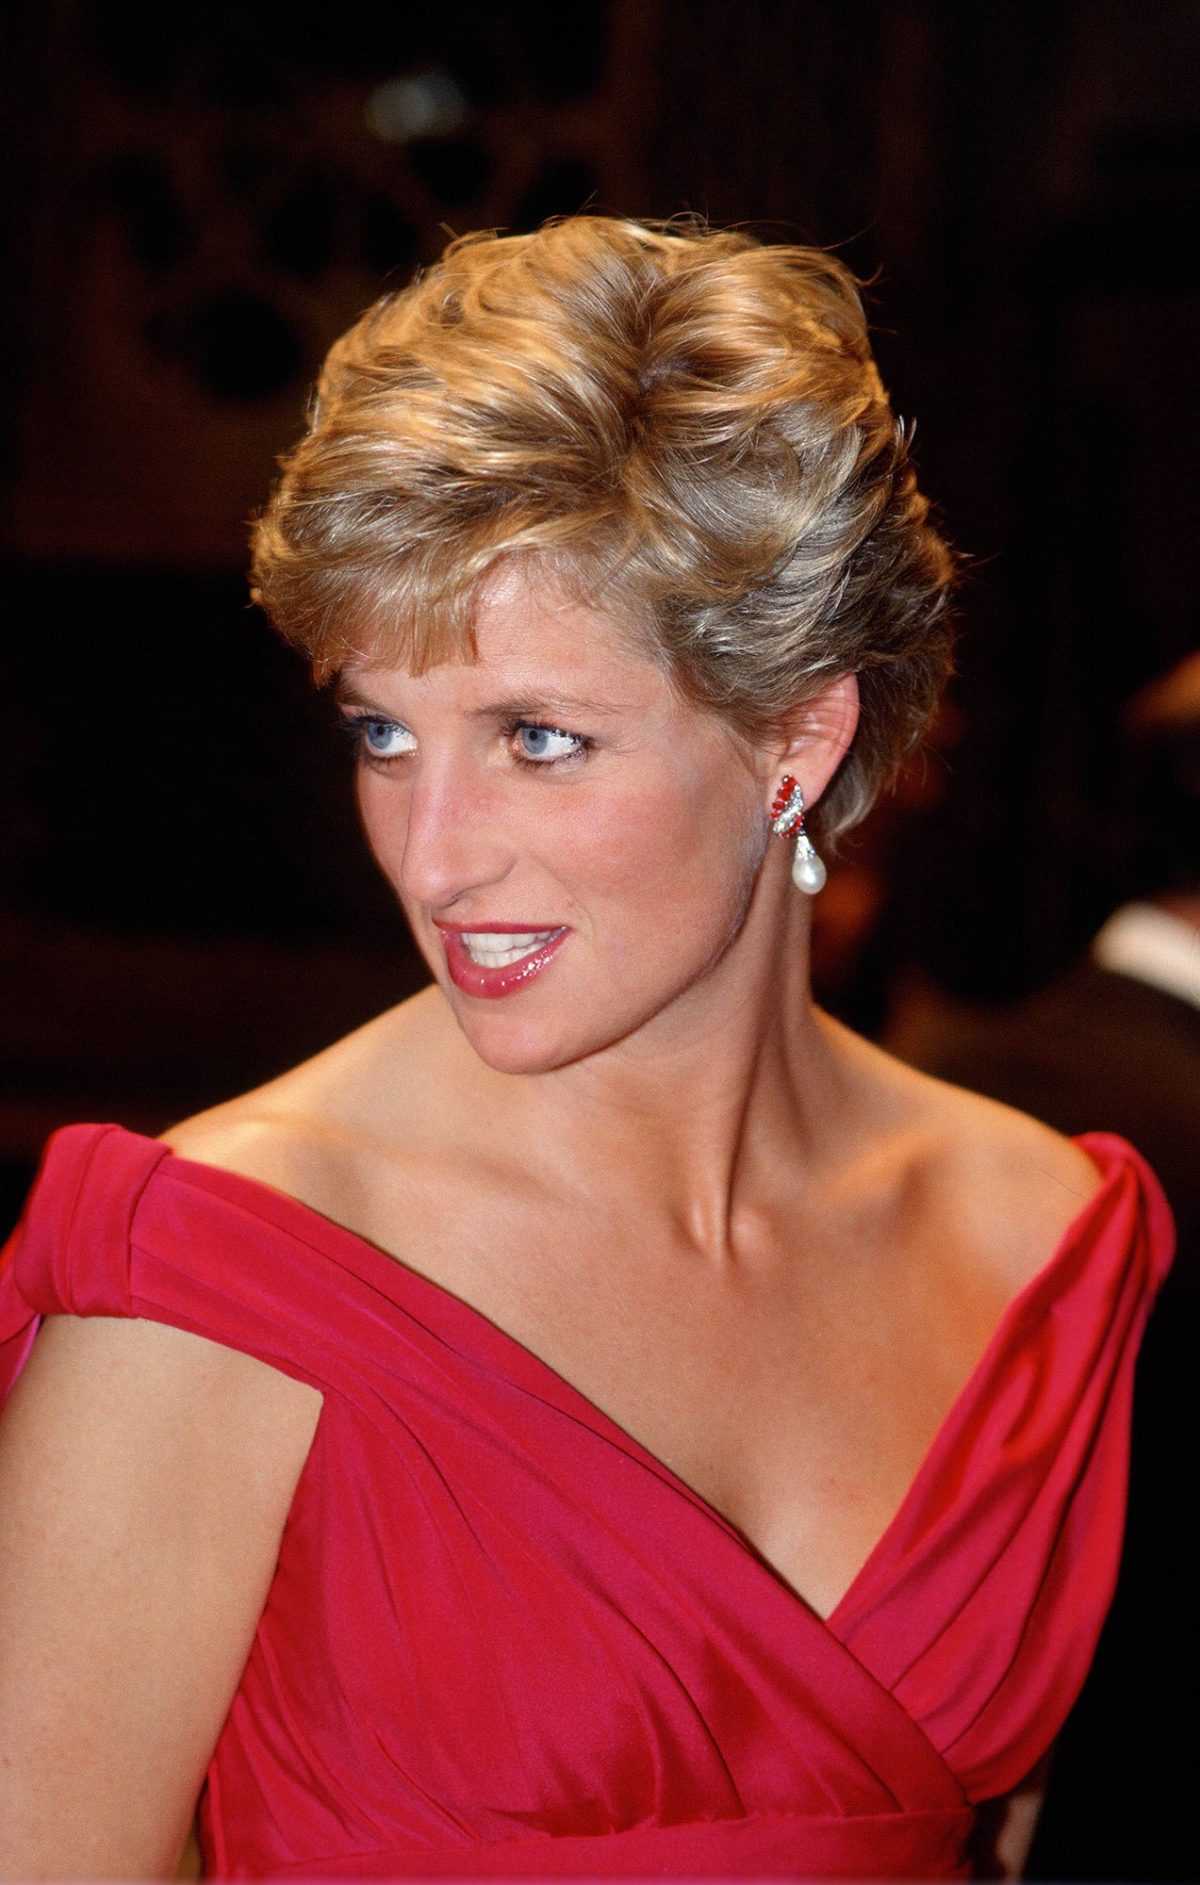 JAPAN - NOVEMBER 14:  Diana, Princess of Wales attends a performance by the Welsh National Opera during a visit to Japan  (Photo by Tim Graham/Getty Images)